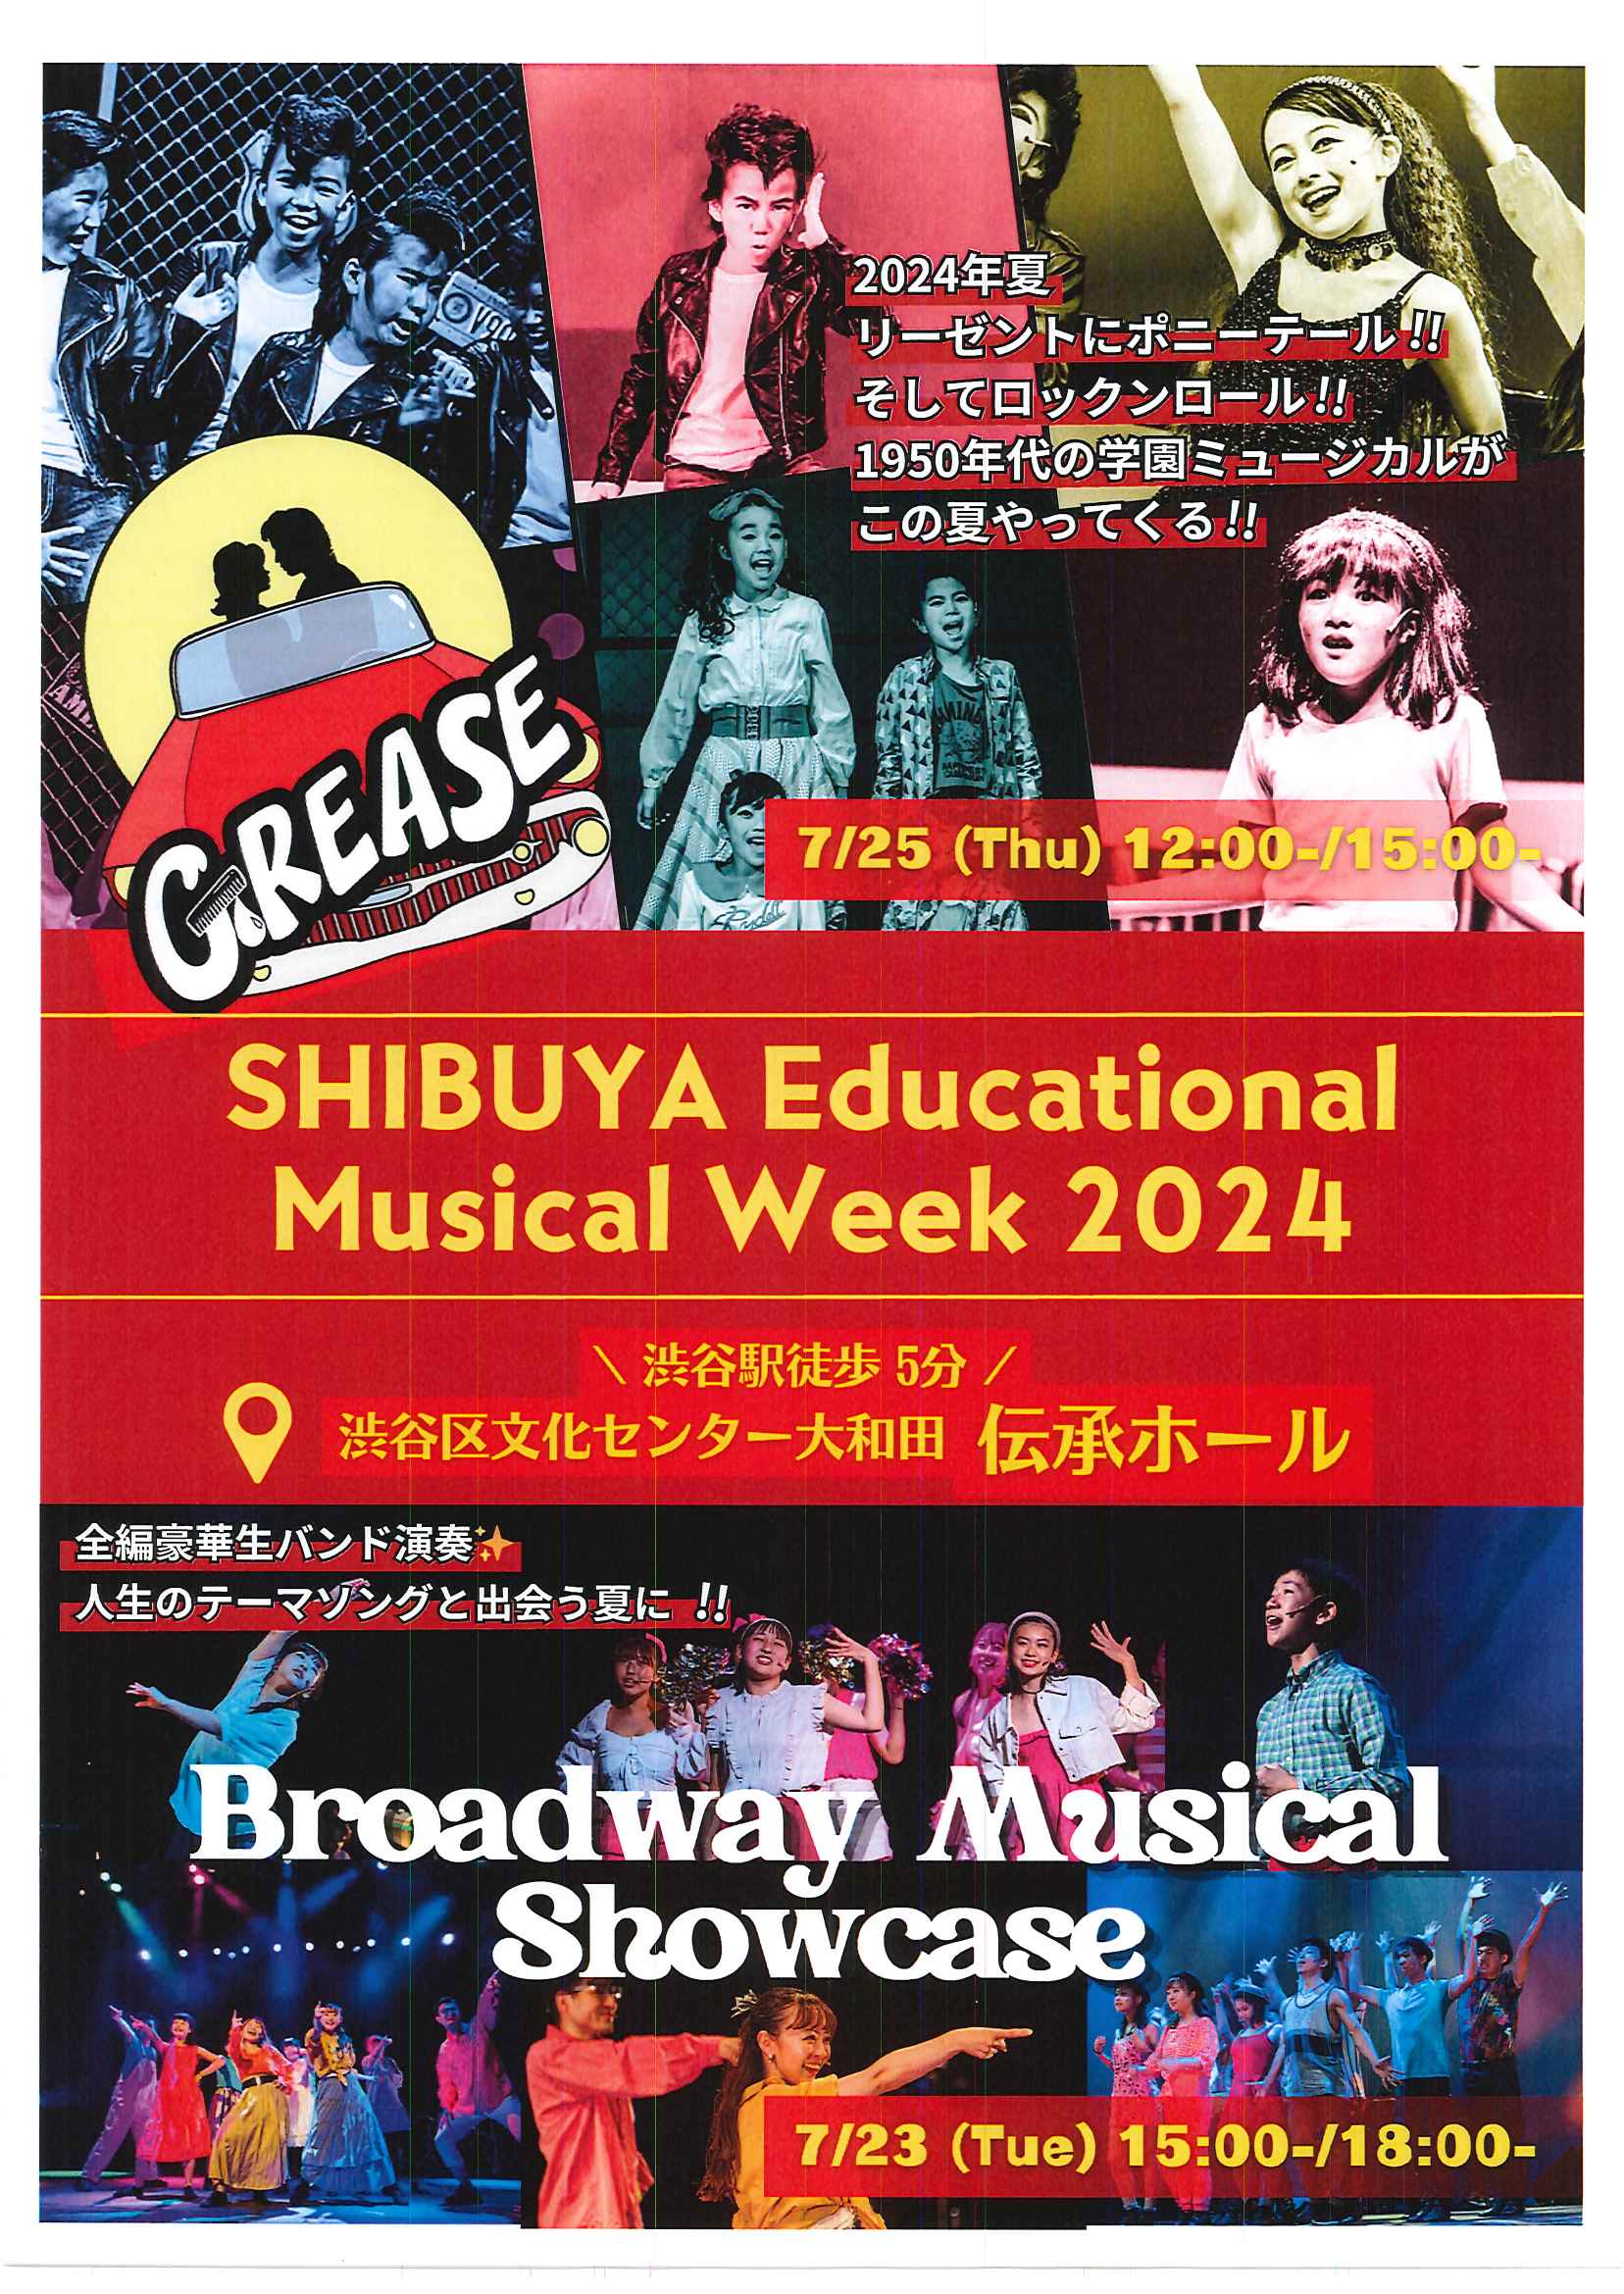 7/25 GREASE